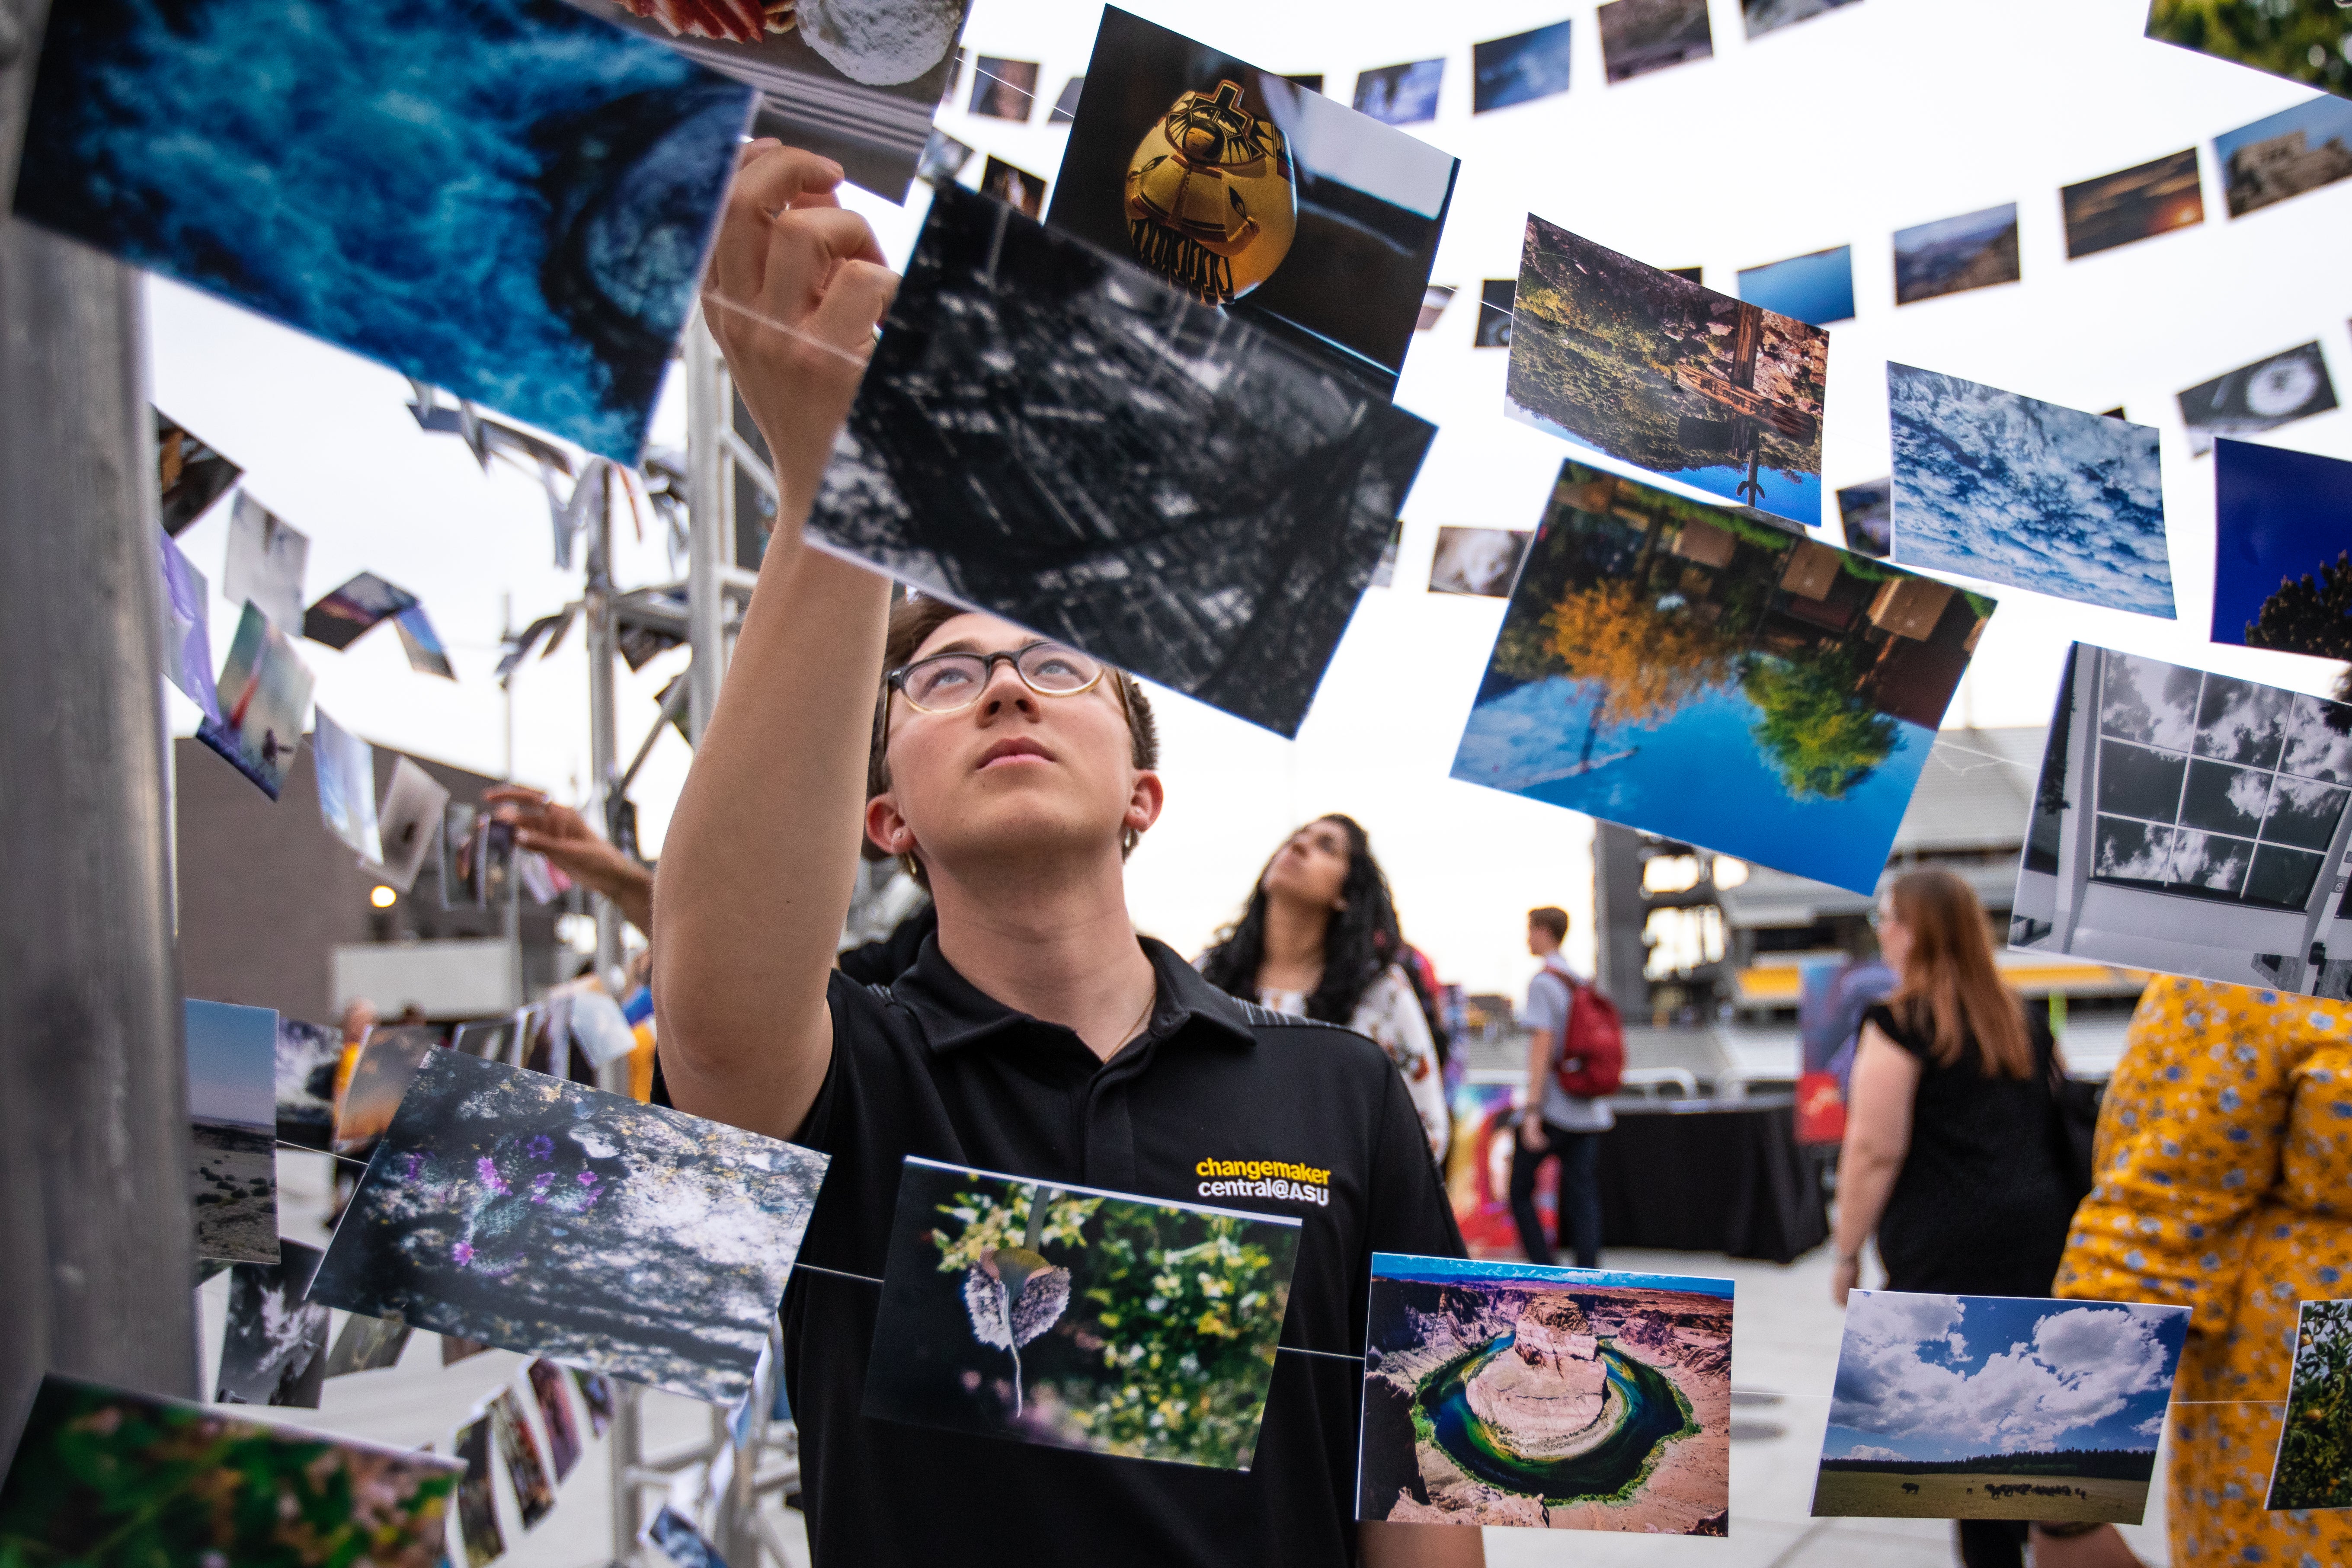 A student participates in the inaugural Change the World event in 2019.